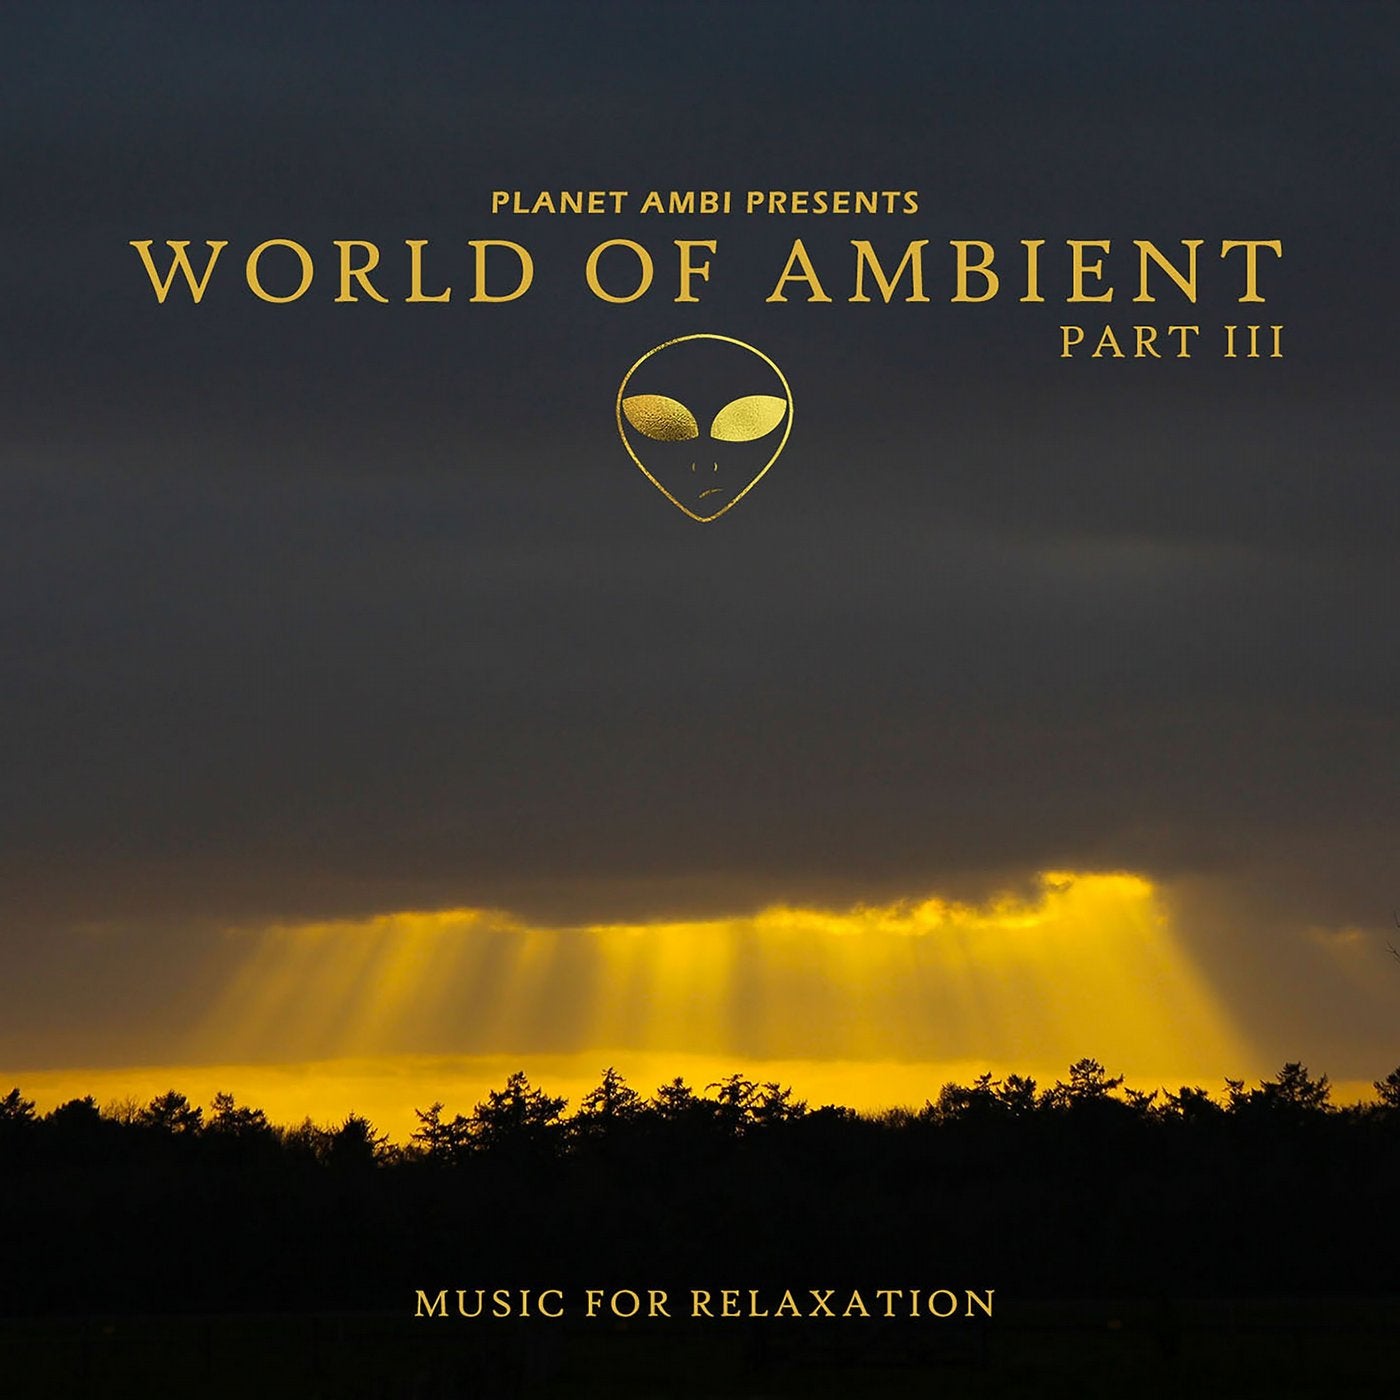 Музыка три месяца. World Ambient. Ambient Heaven. Silence of the Stars. The Silent Stars go by.